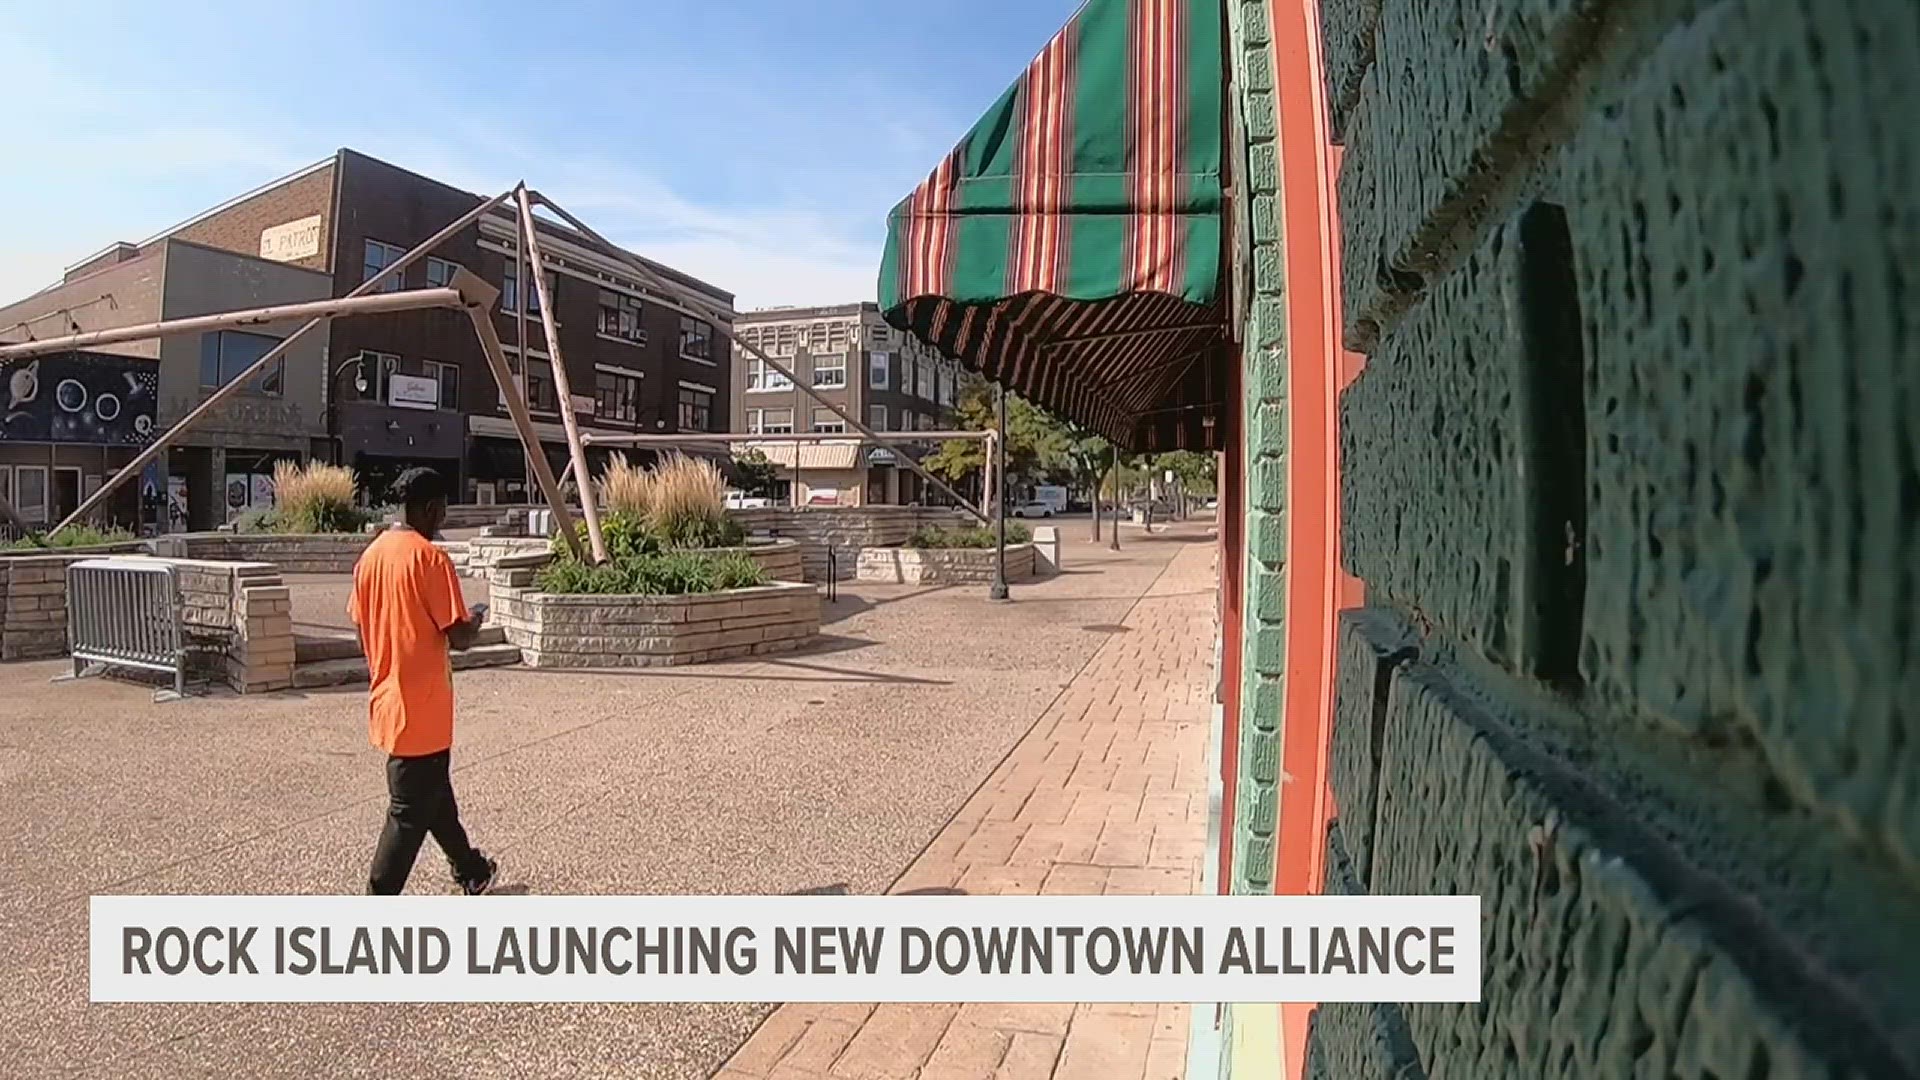 The goal of the downtown alliance is to enhance public spaces, encourage private investment and improve the quality of life in downtown Rock Island.